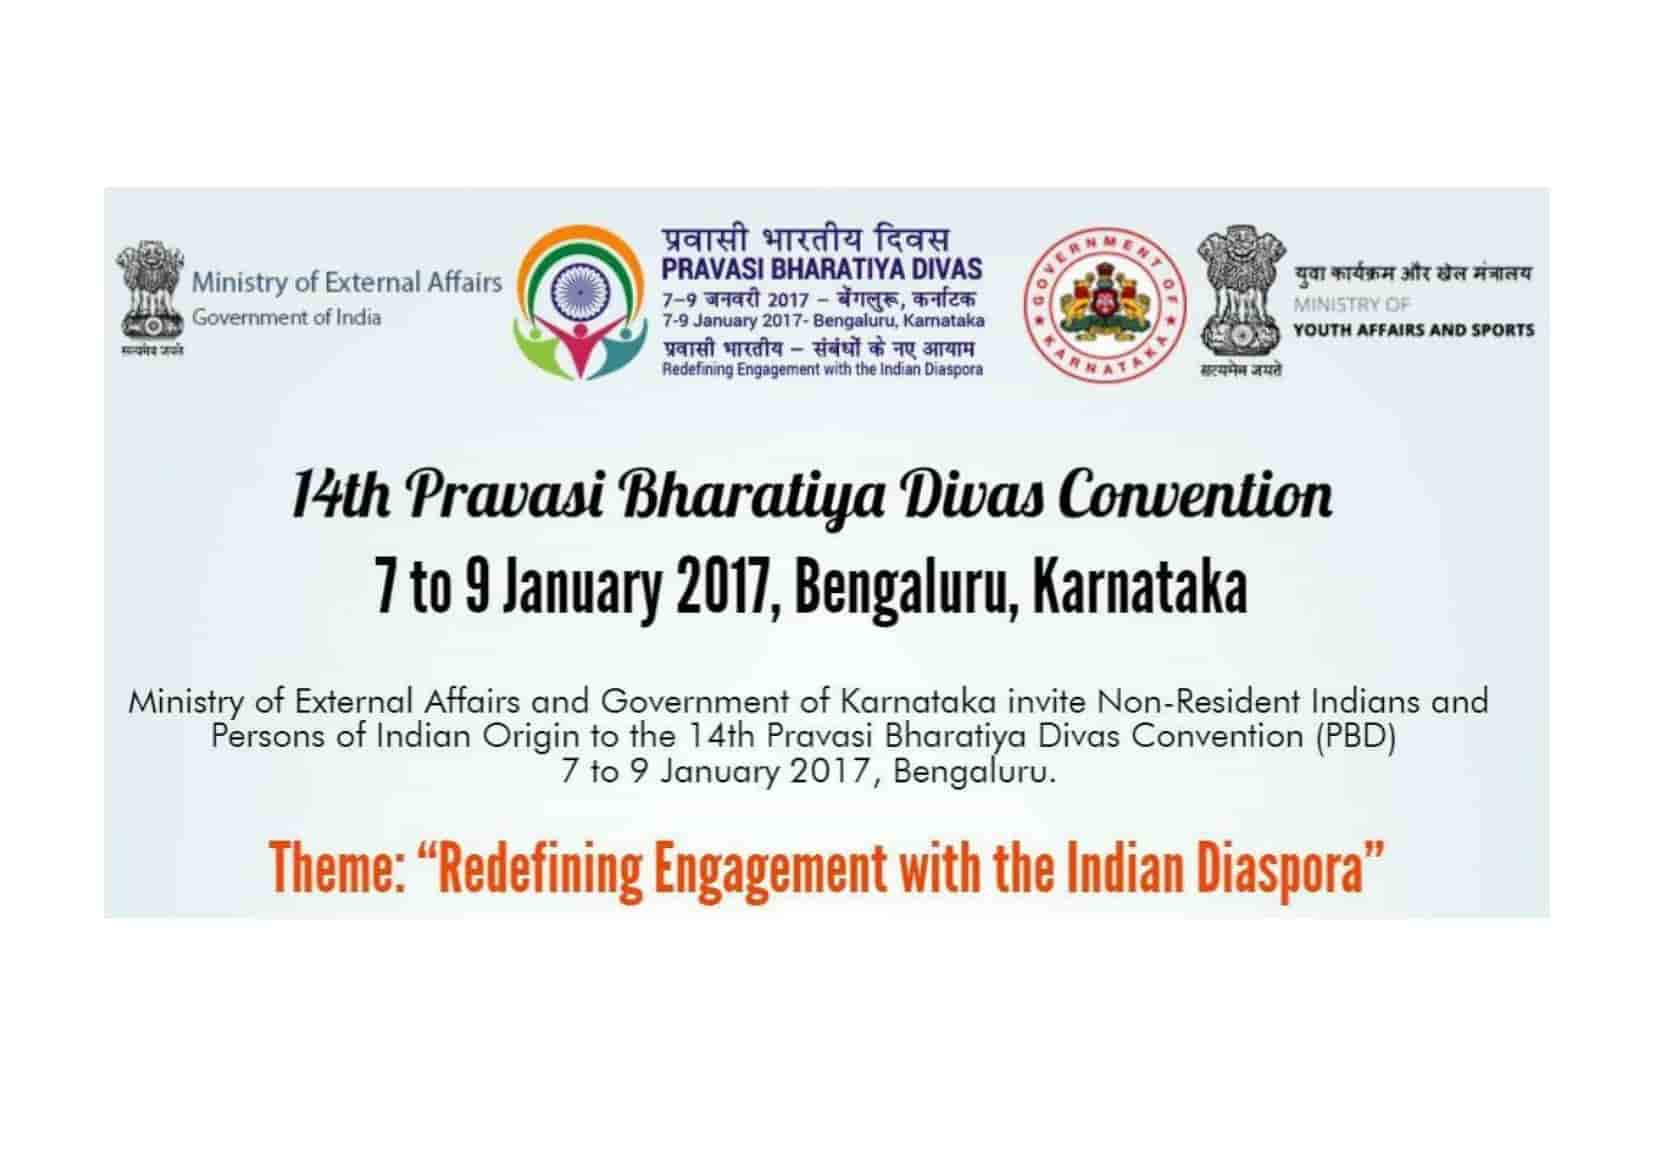 Every year on January 9th, Pravasi Bharatiya Divas (PBD) is celebrated to help the overseas Indian community reconnect with their roots.